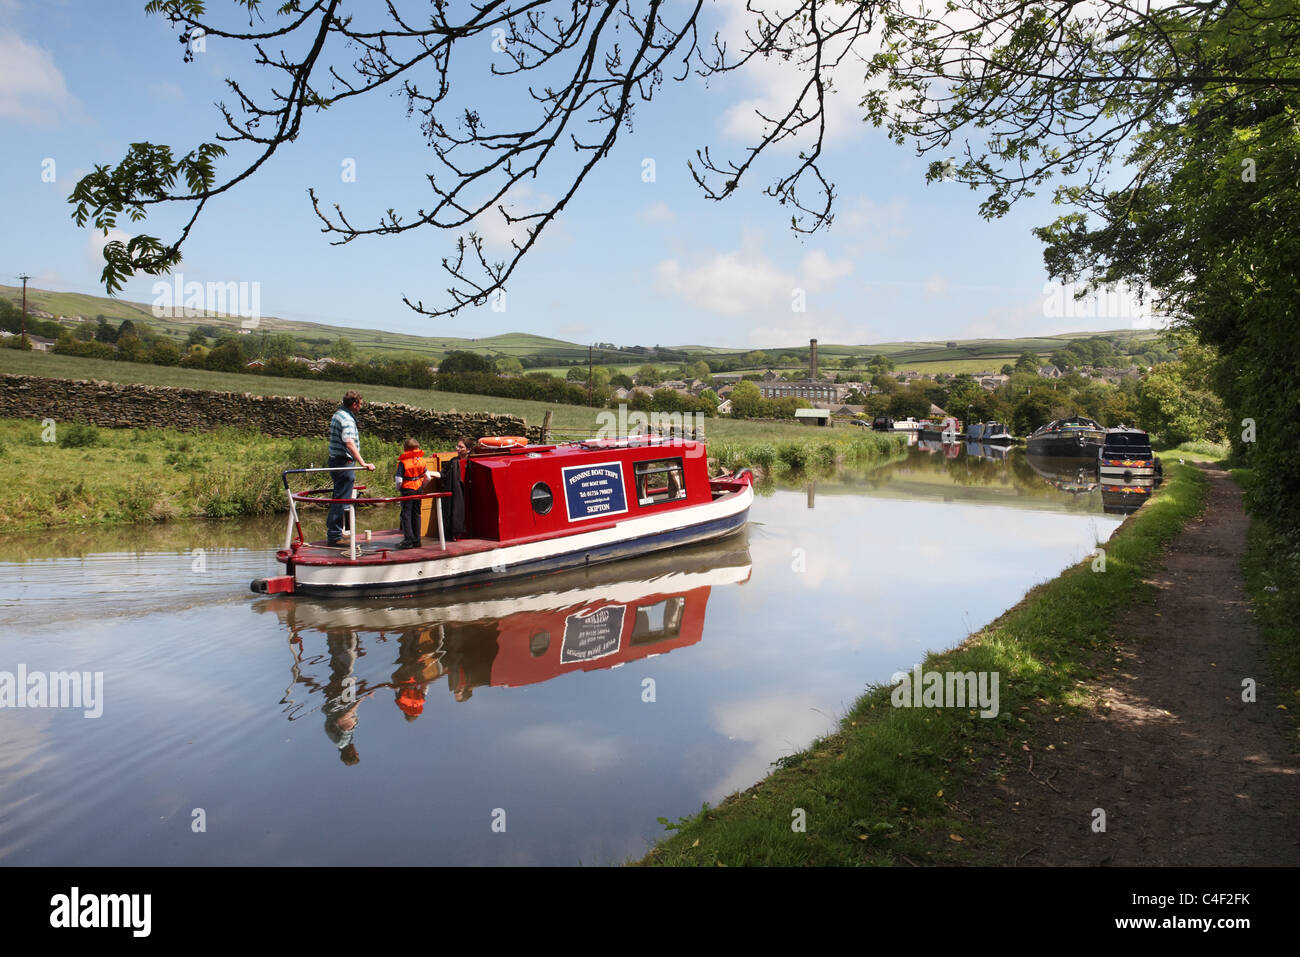 A family on a canal narrow boat on the Leeds and Liverpool canal near Skipton, Yorkshire, England, UK Stock Photo